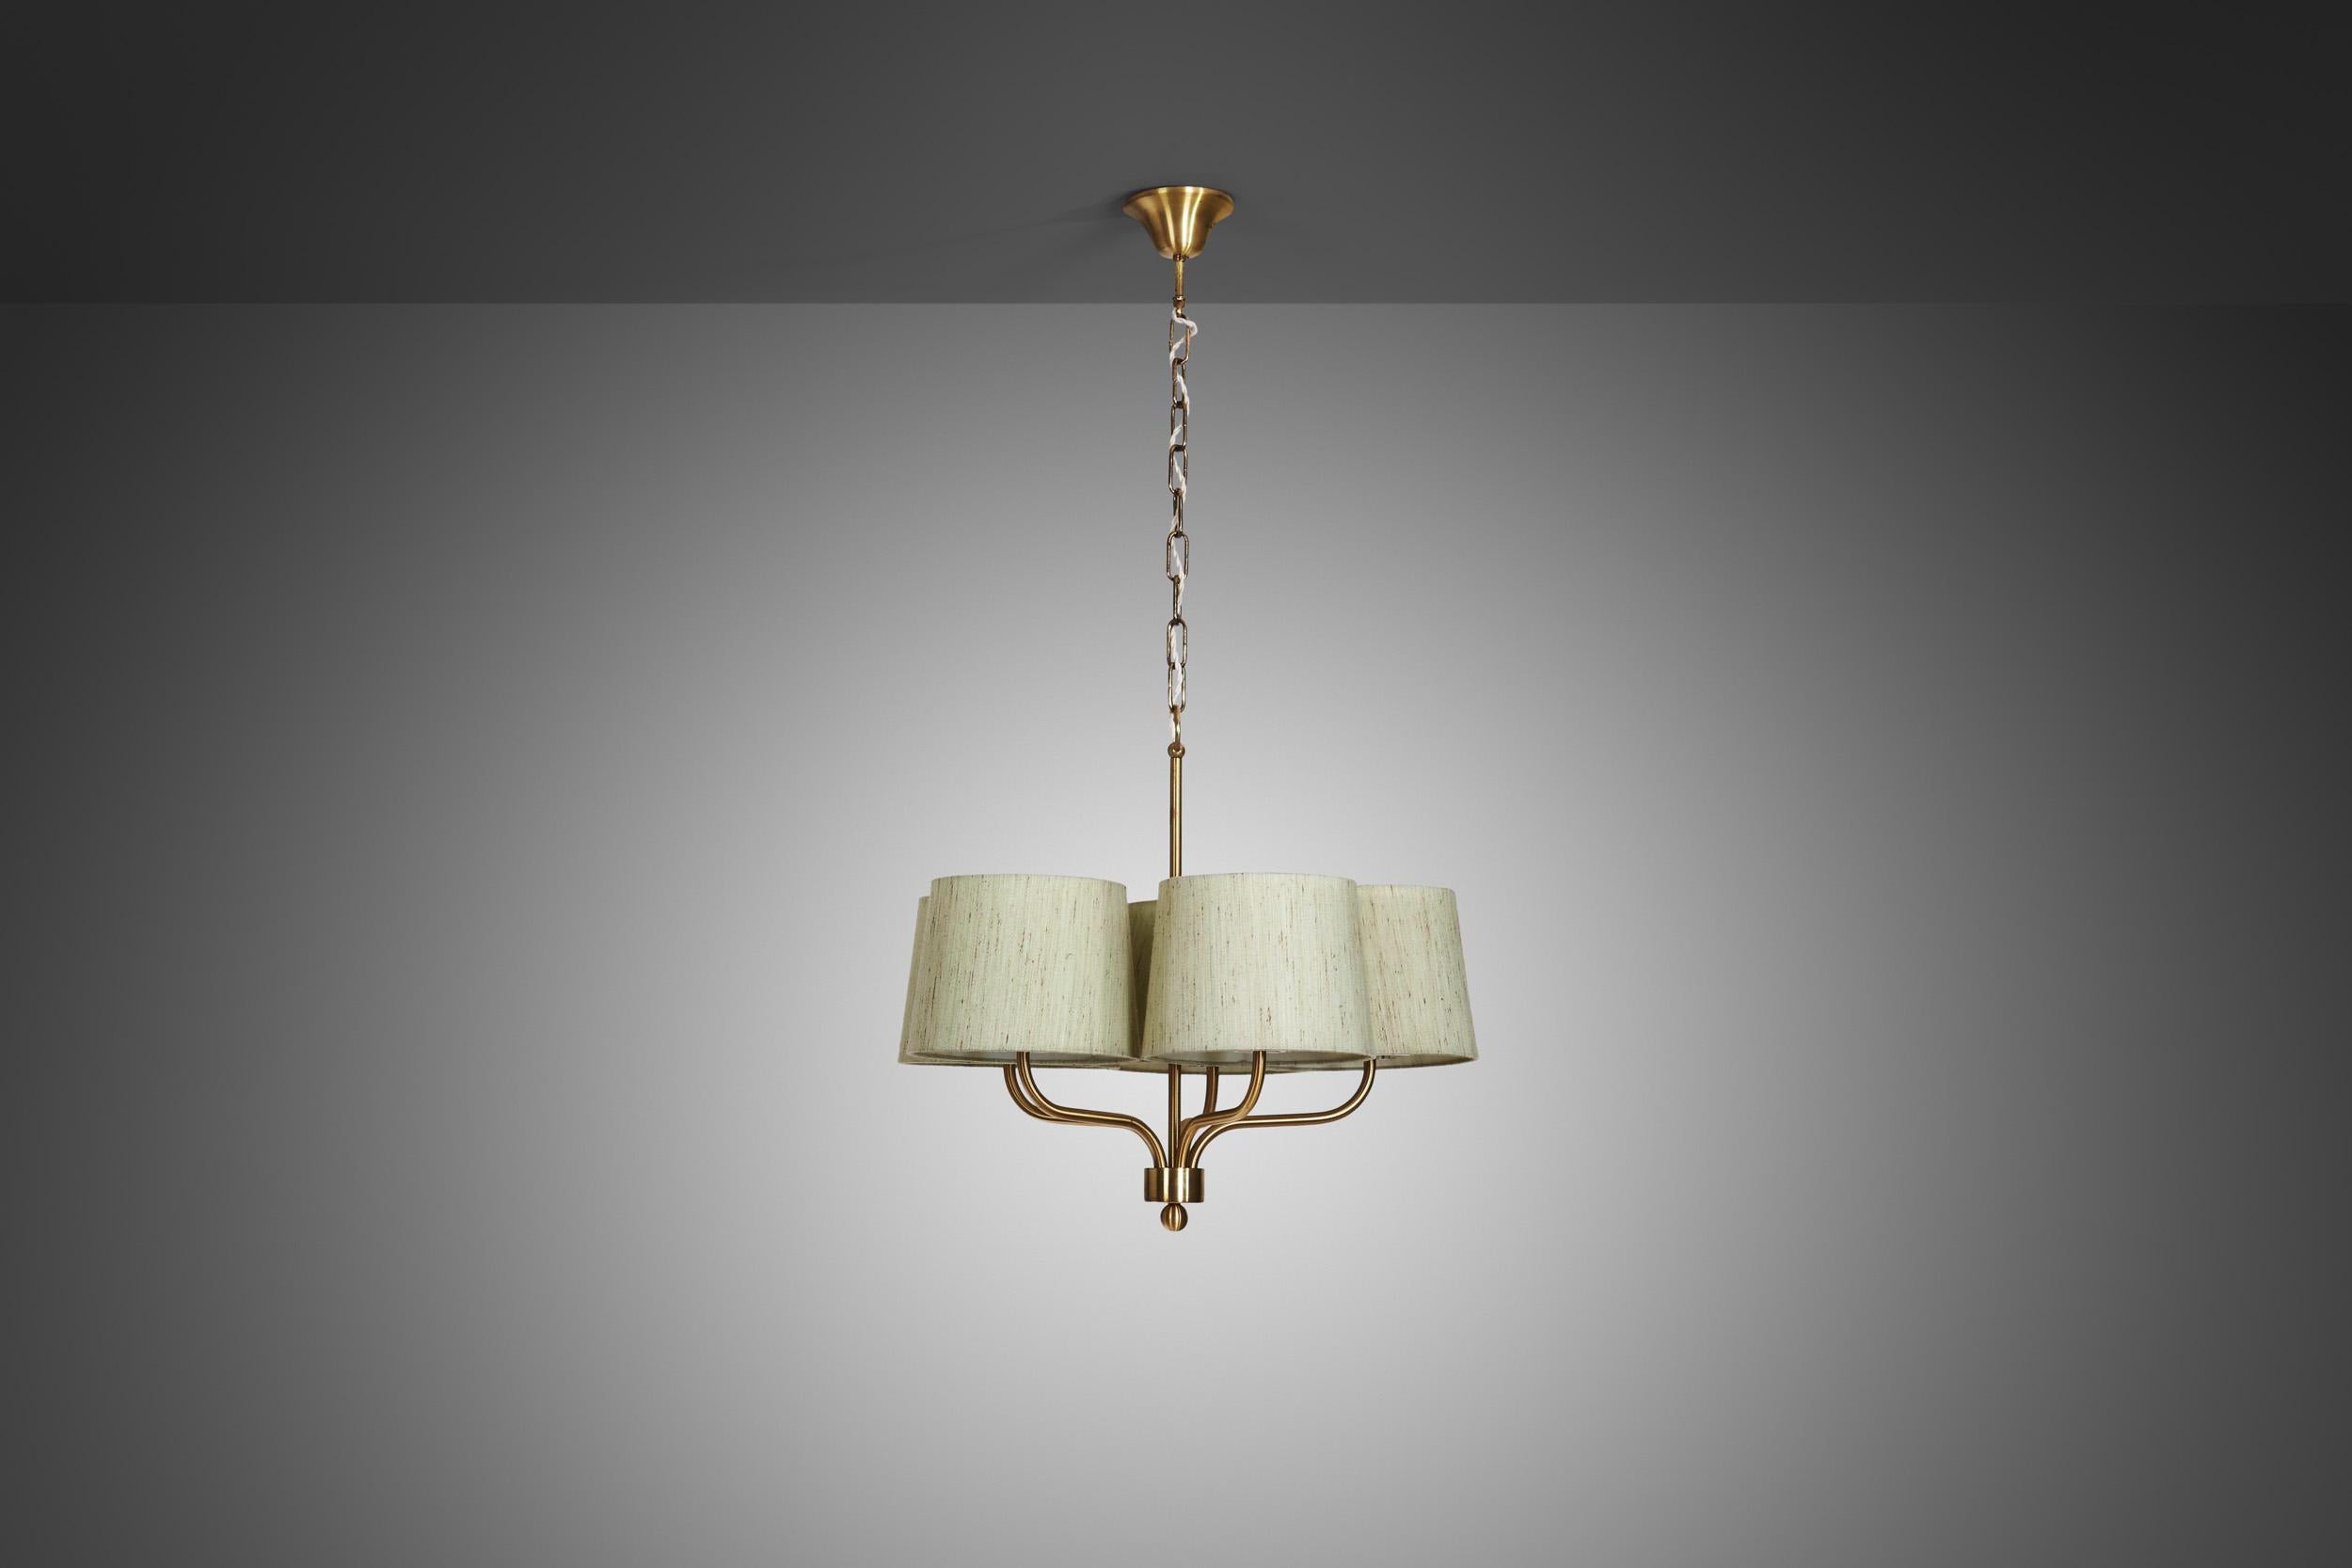 Five Arm Brass Ceiling Lamp with Fabric Shades by Luxus Vittsjö, Sweden 1960s For Sale 1